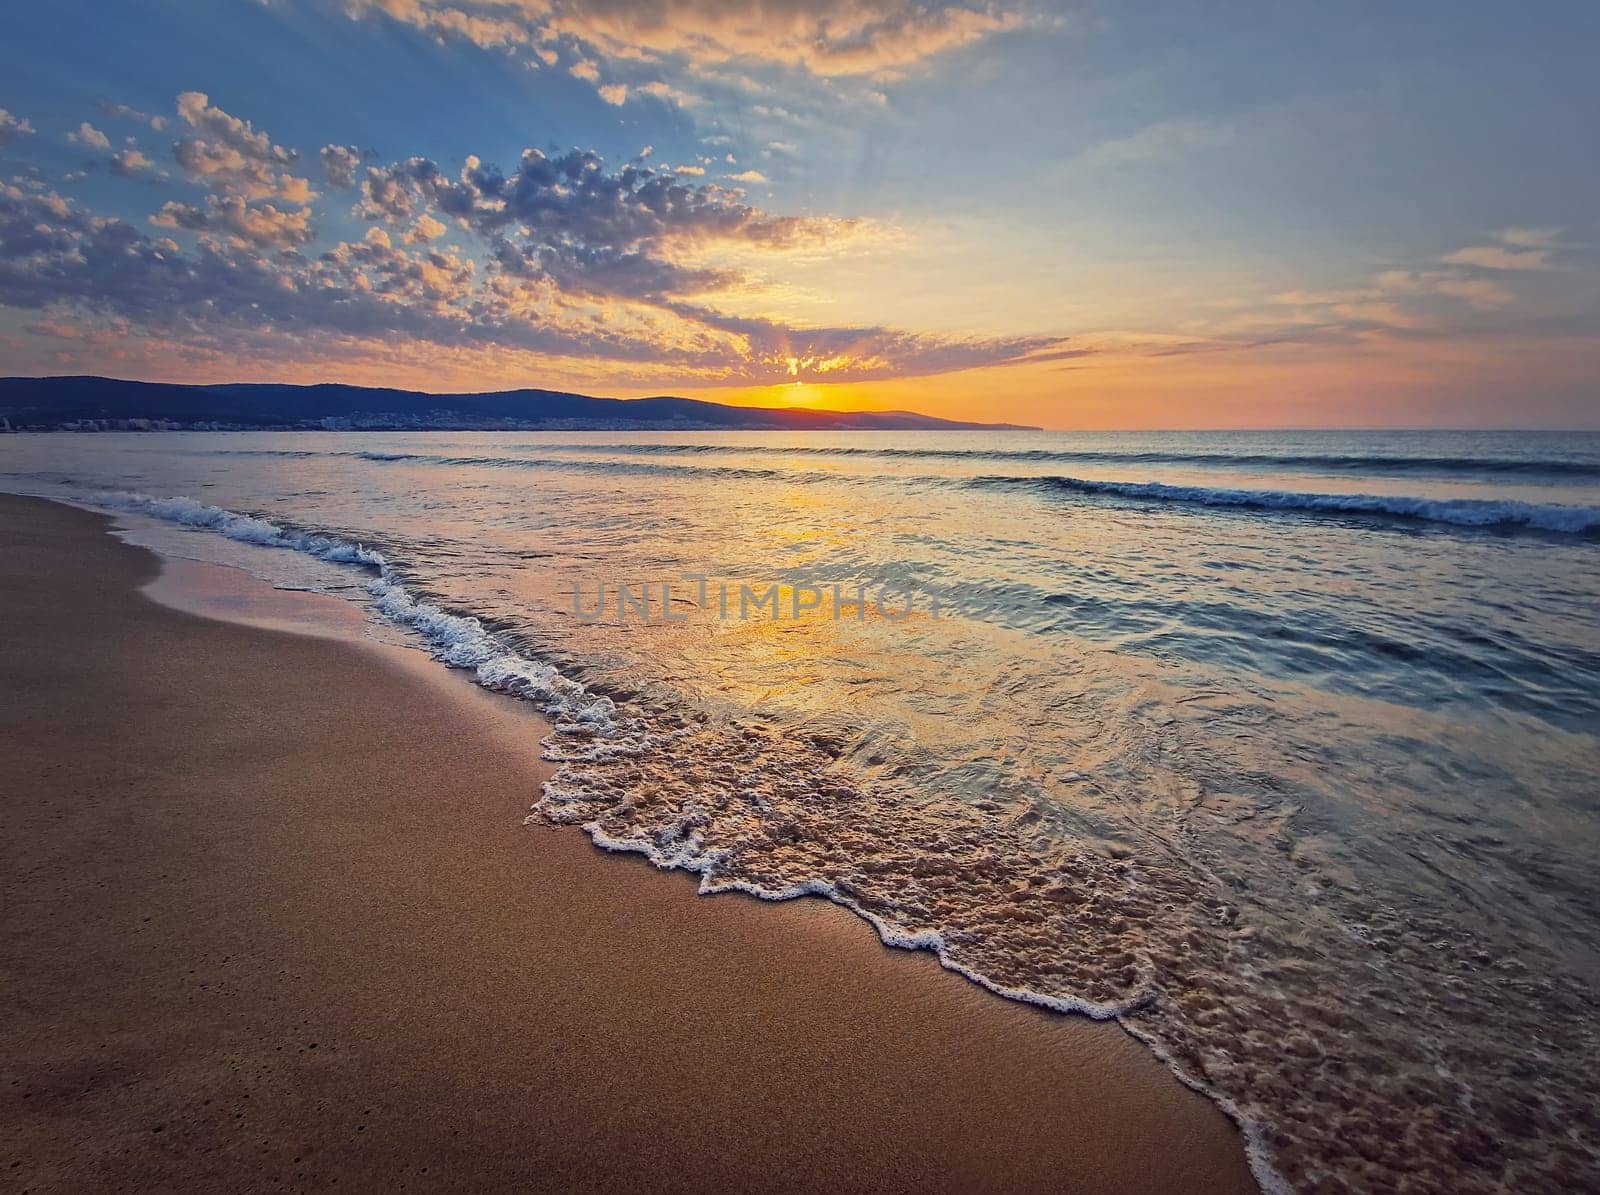 Sea sunrise scene, natural background. Early morning on the beach with a peaceful view to the dawn above the hills. Summer holiday seaside, travel concept